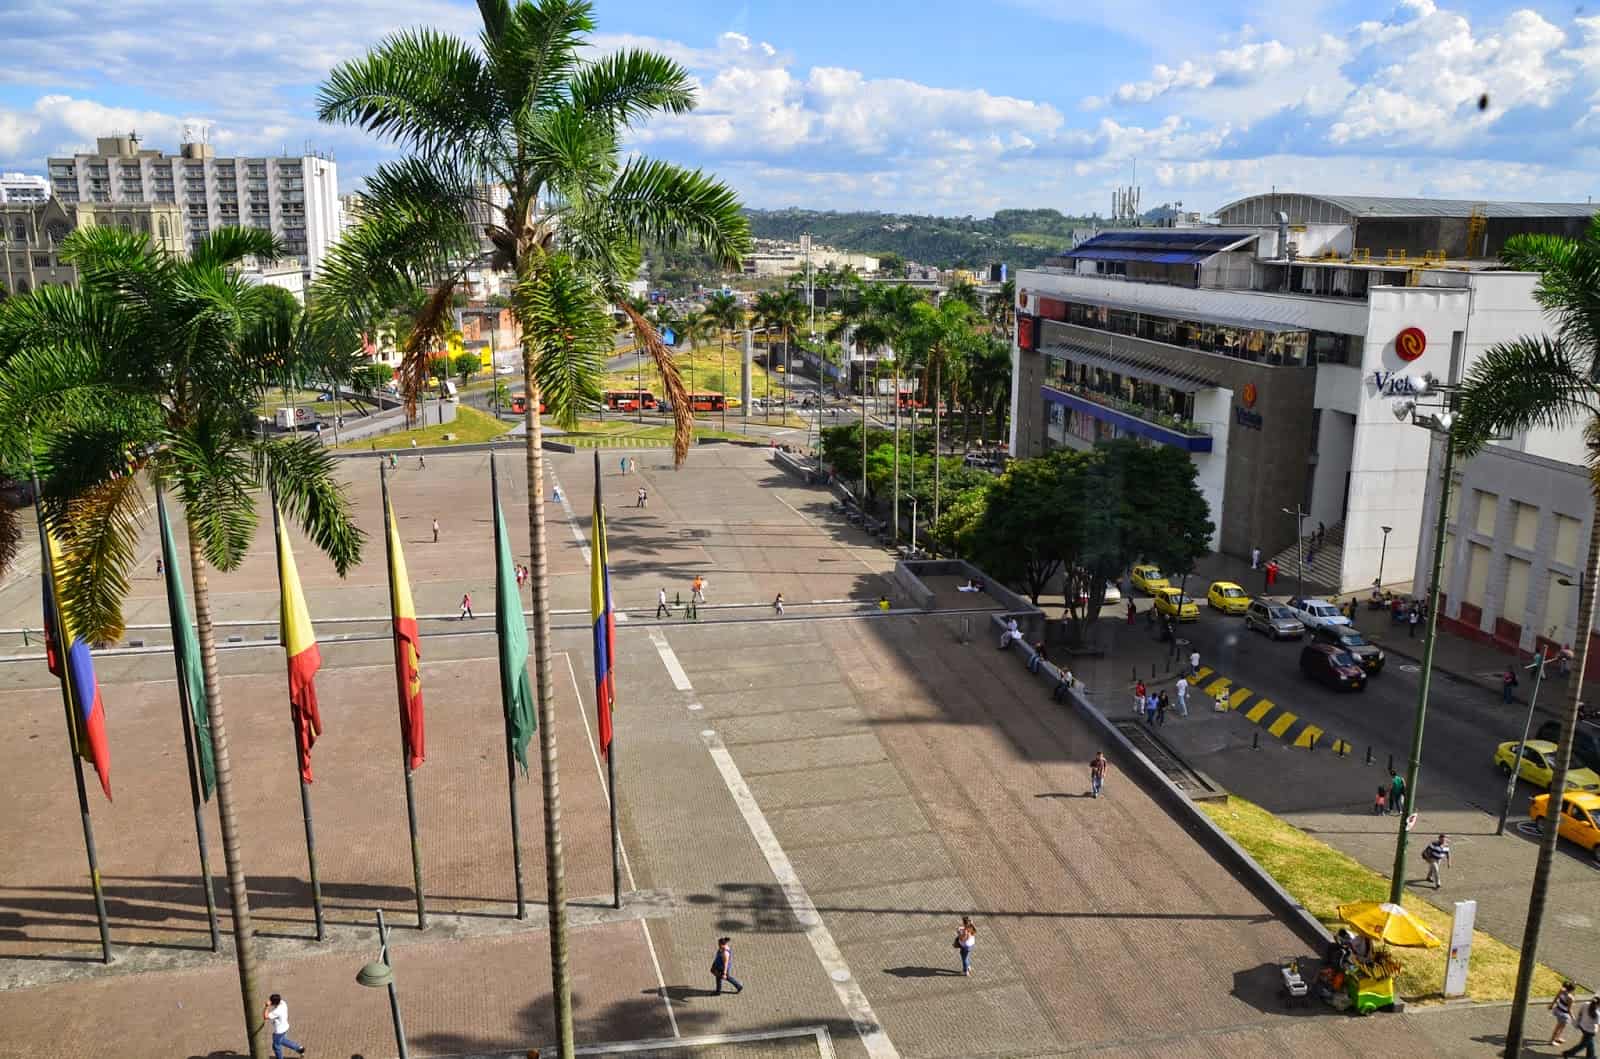 View of Plaza Victoria and Victoria Mall from the Lucy Tejada Cultural Center in Pereira, Risaralda, Colombia